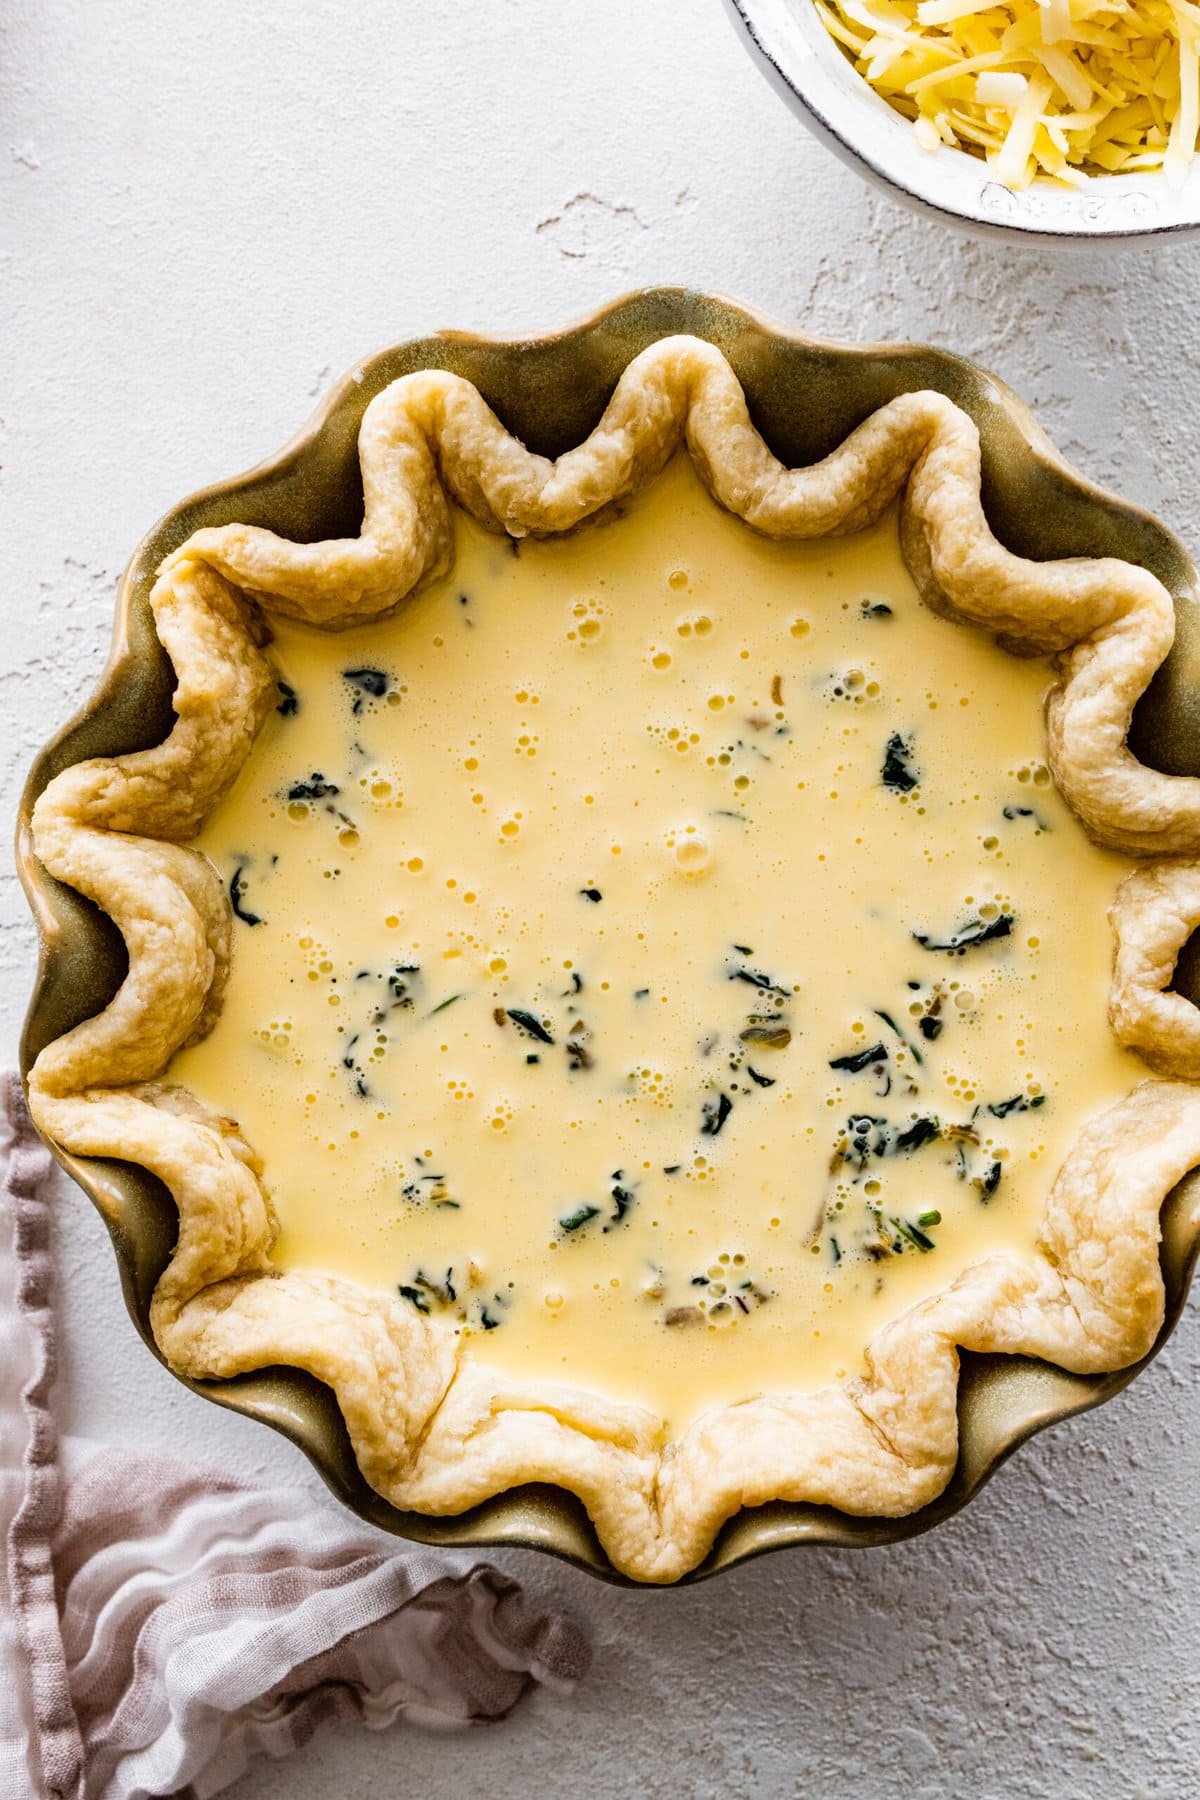 How to make spinach quiche step-by-step: quiche before baking